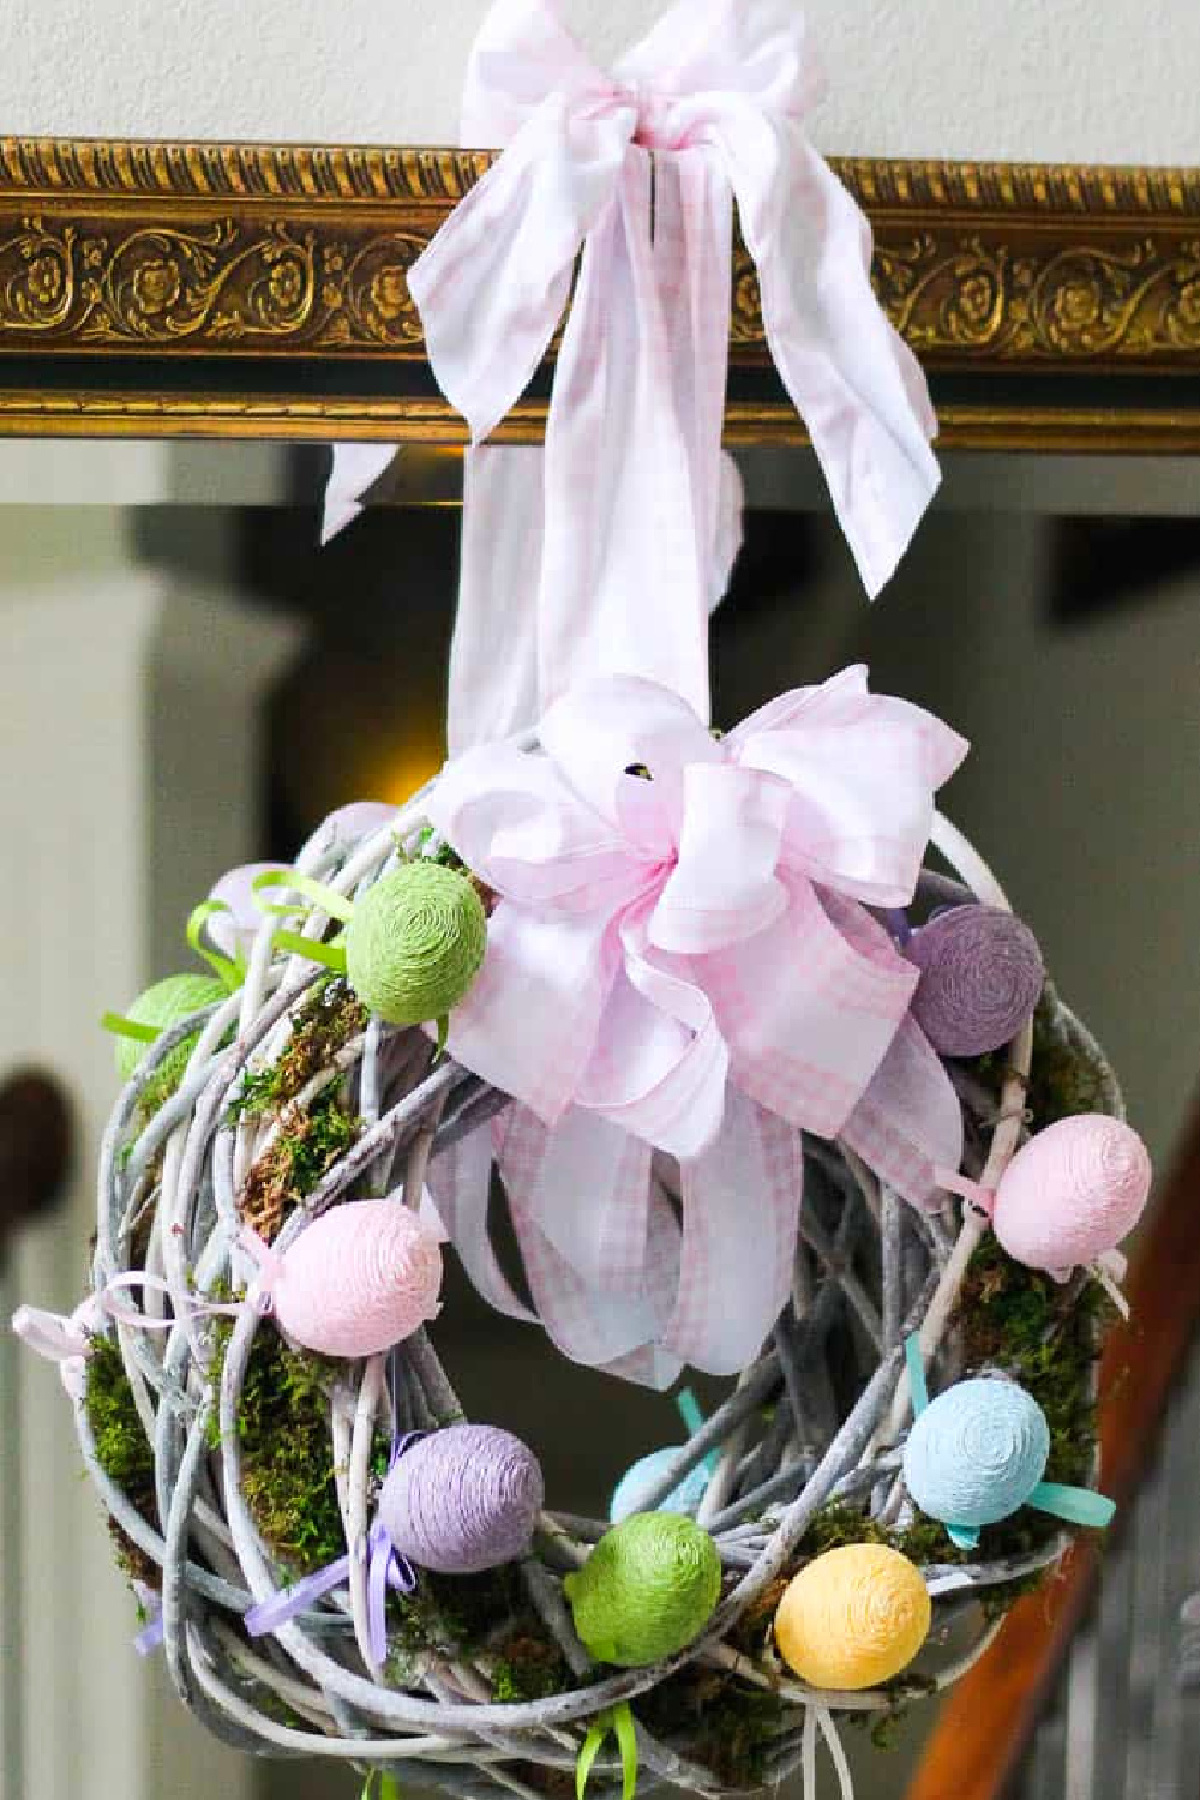 Colorful Easter Decorations Make the Season Special - Bluesky at Home